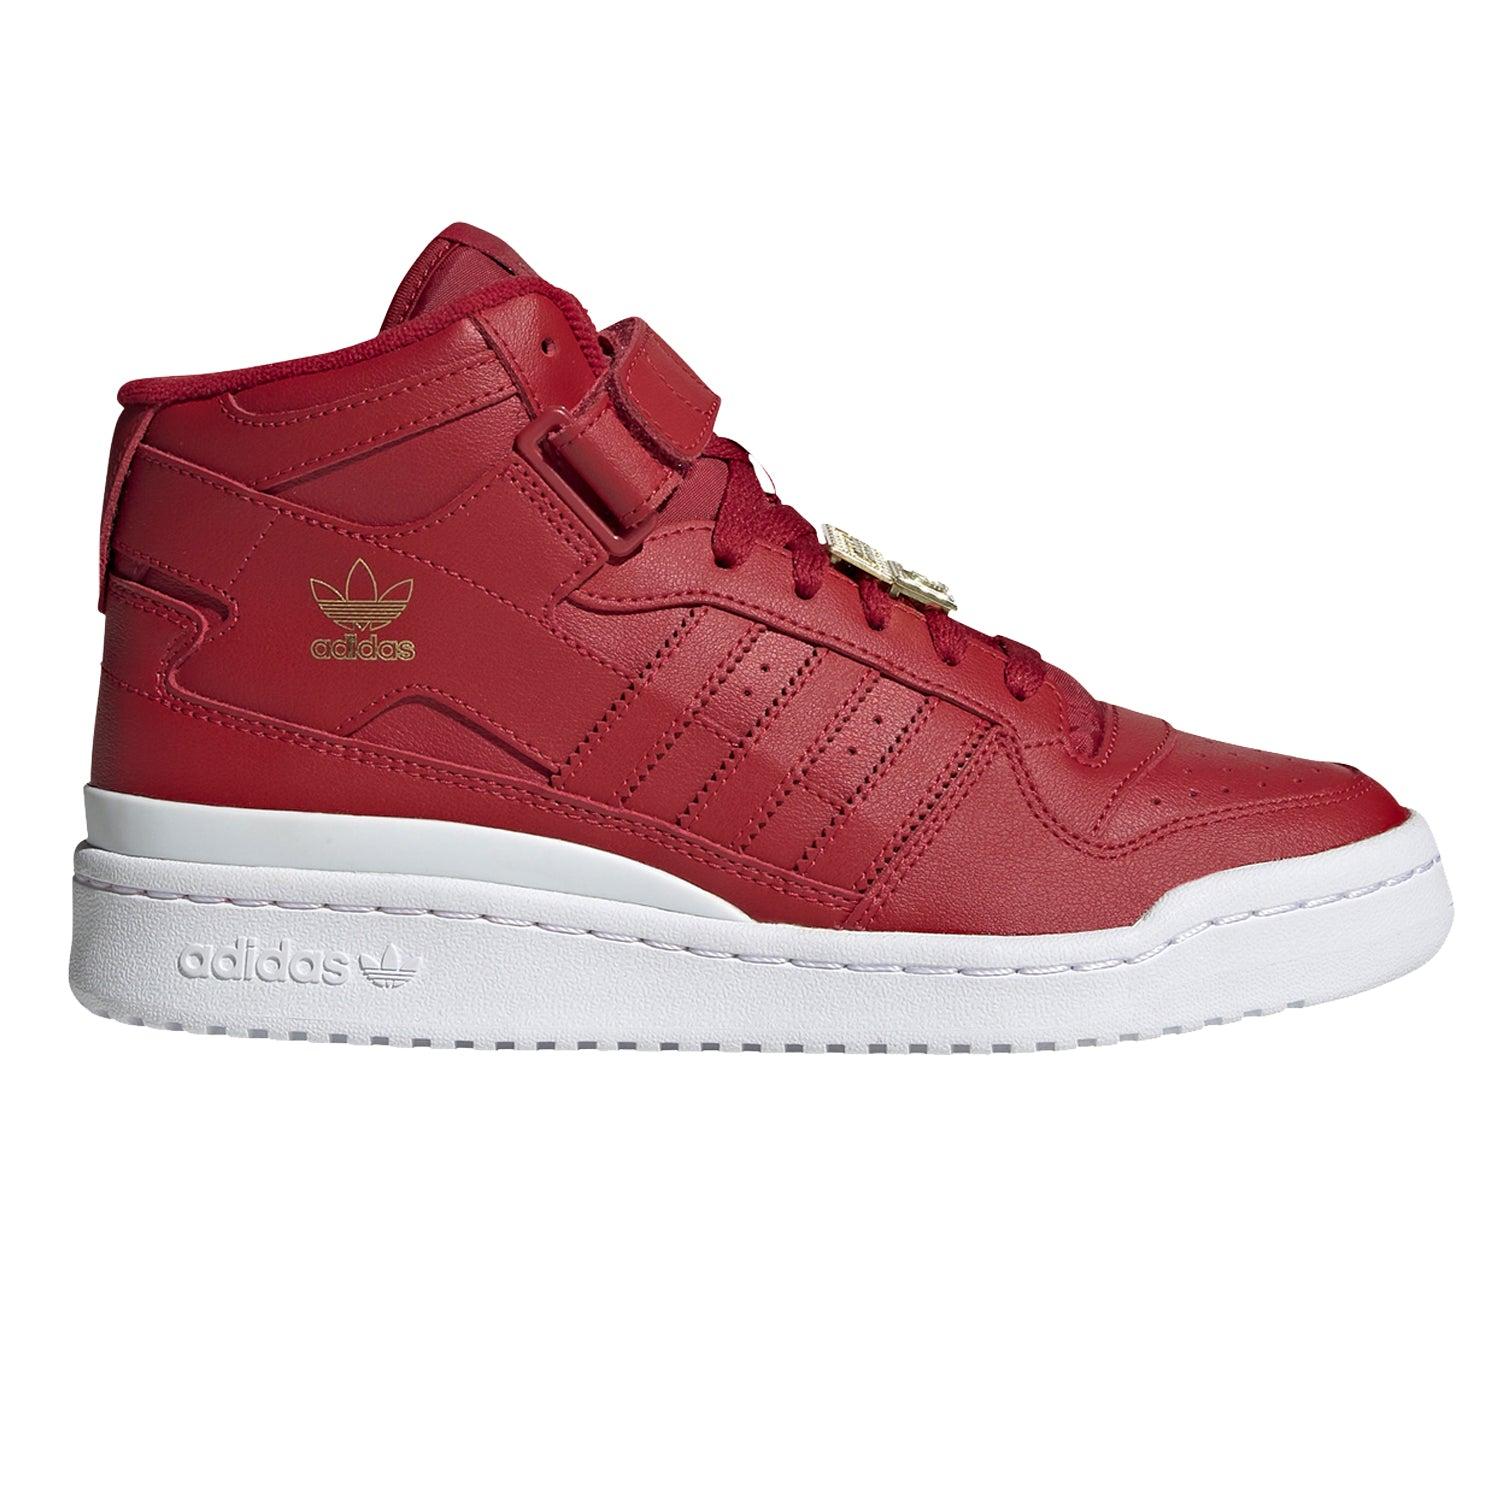 adidas Originals Womens Forum Mid Shoes in Red | Lyst UK